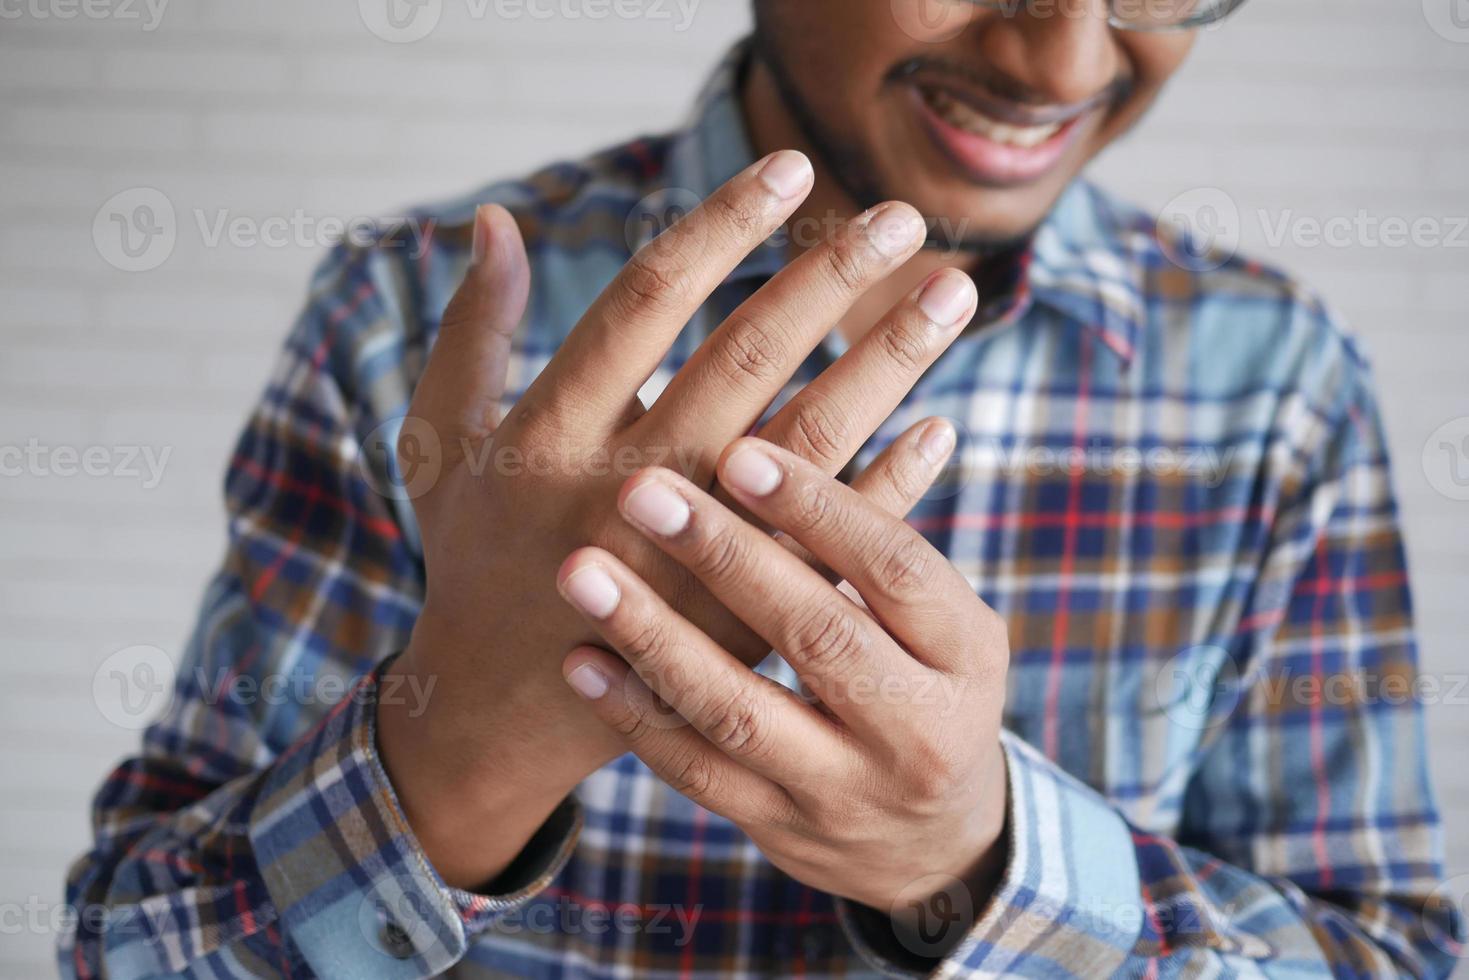 man suffering pain in hand close up photo